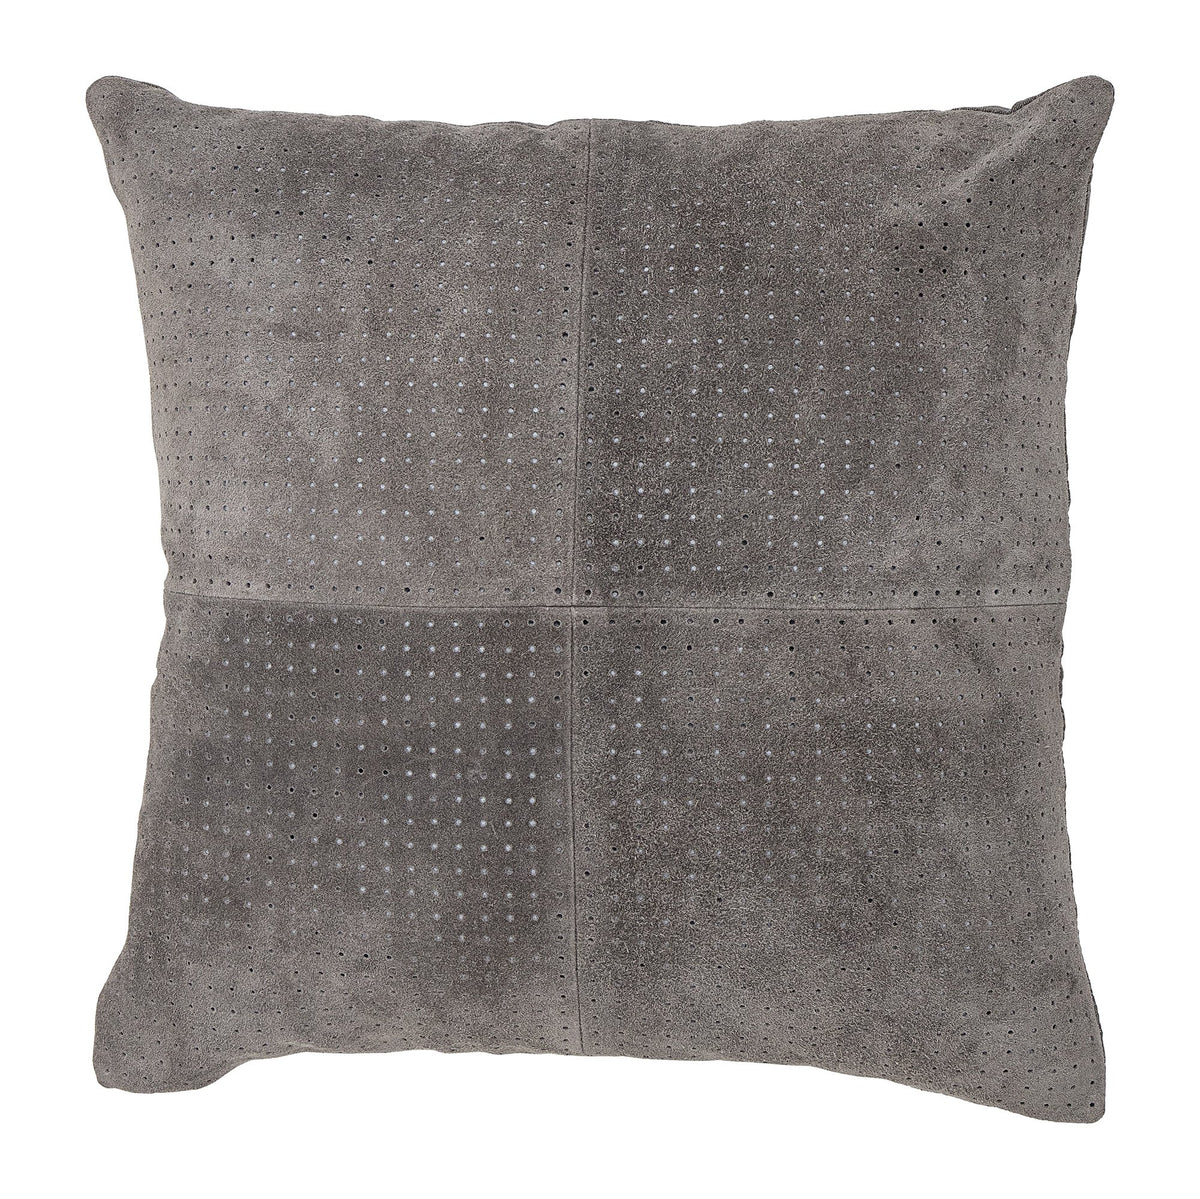 Square Grey Suede Cushion Bloomingville